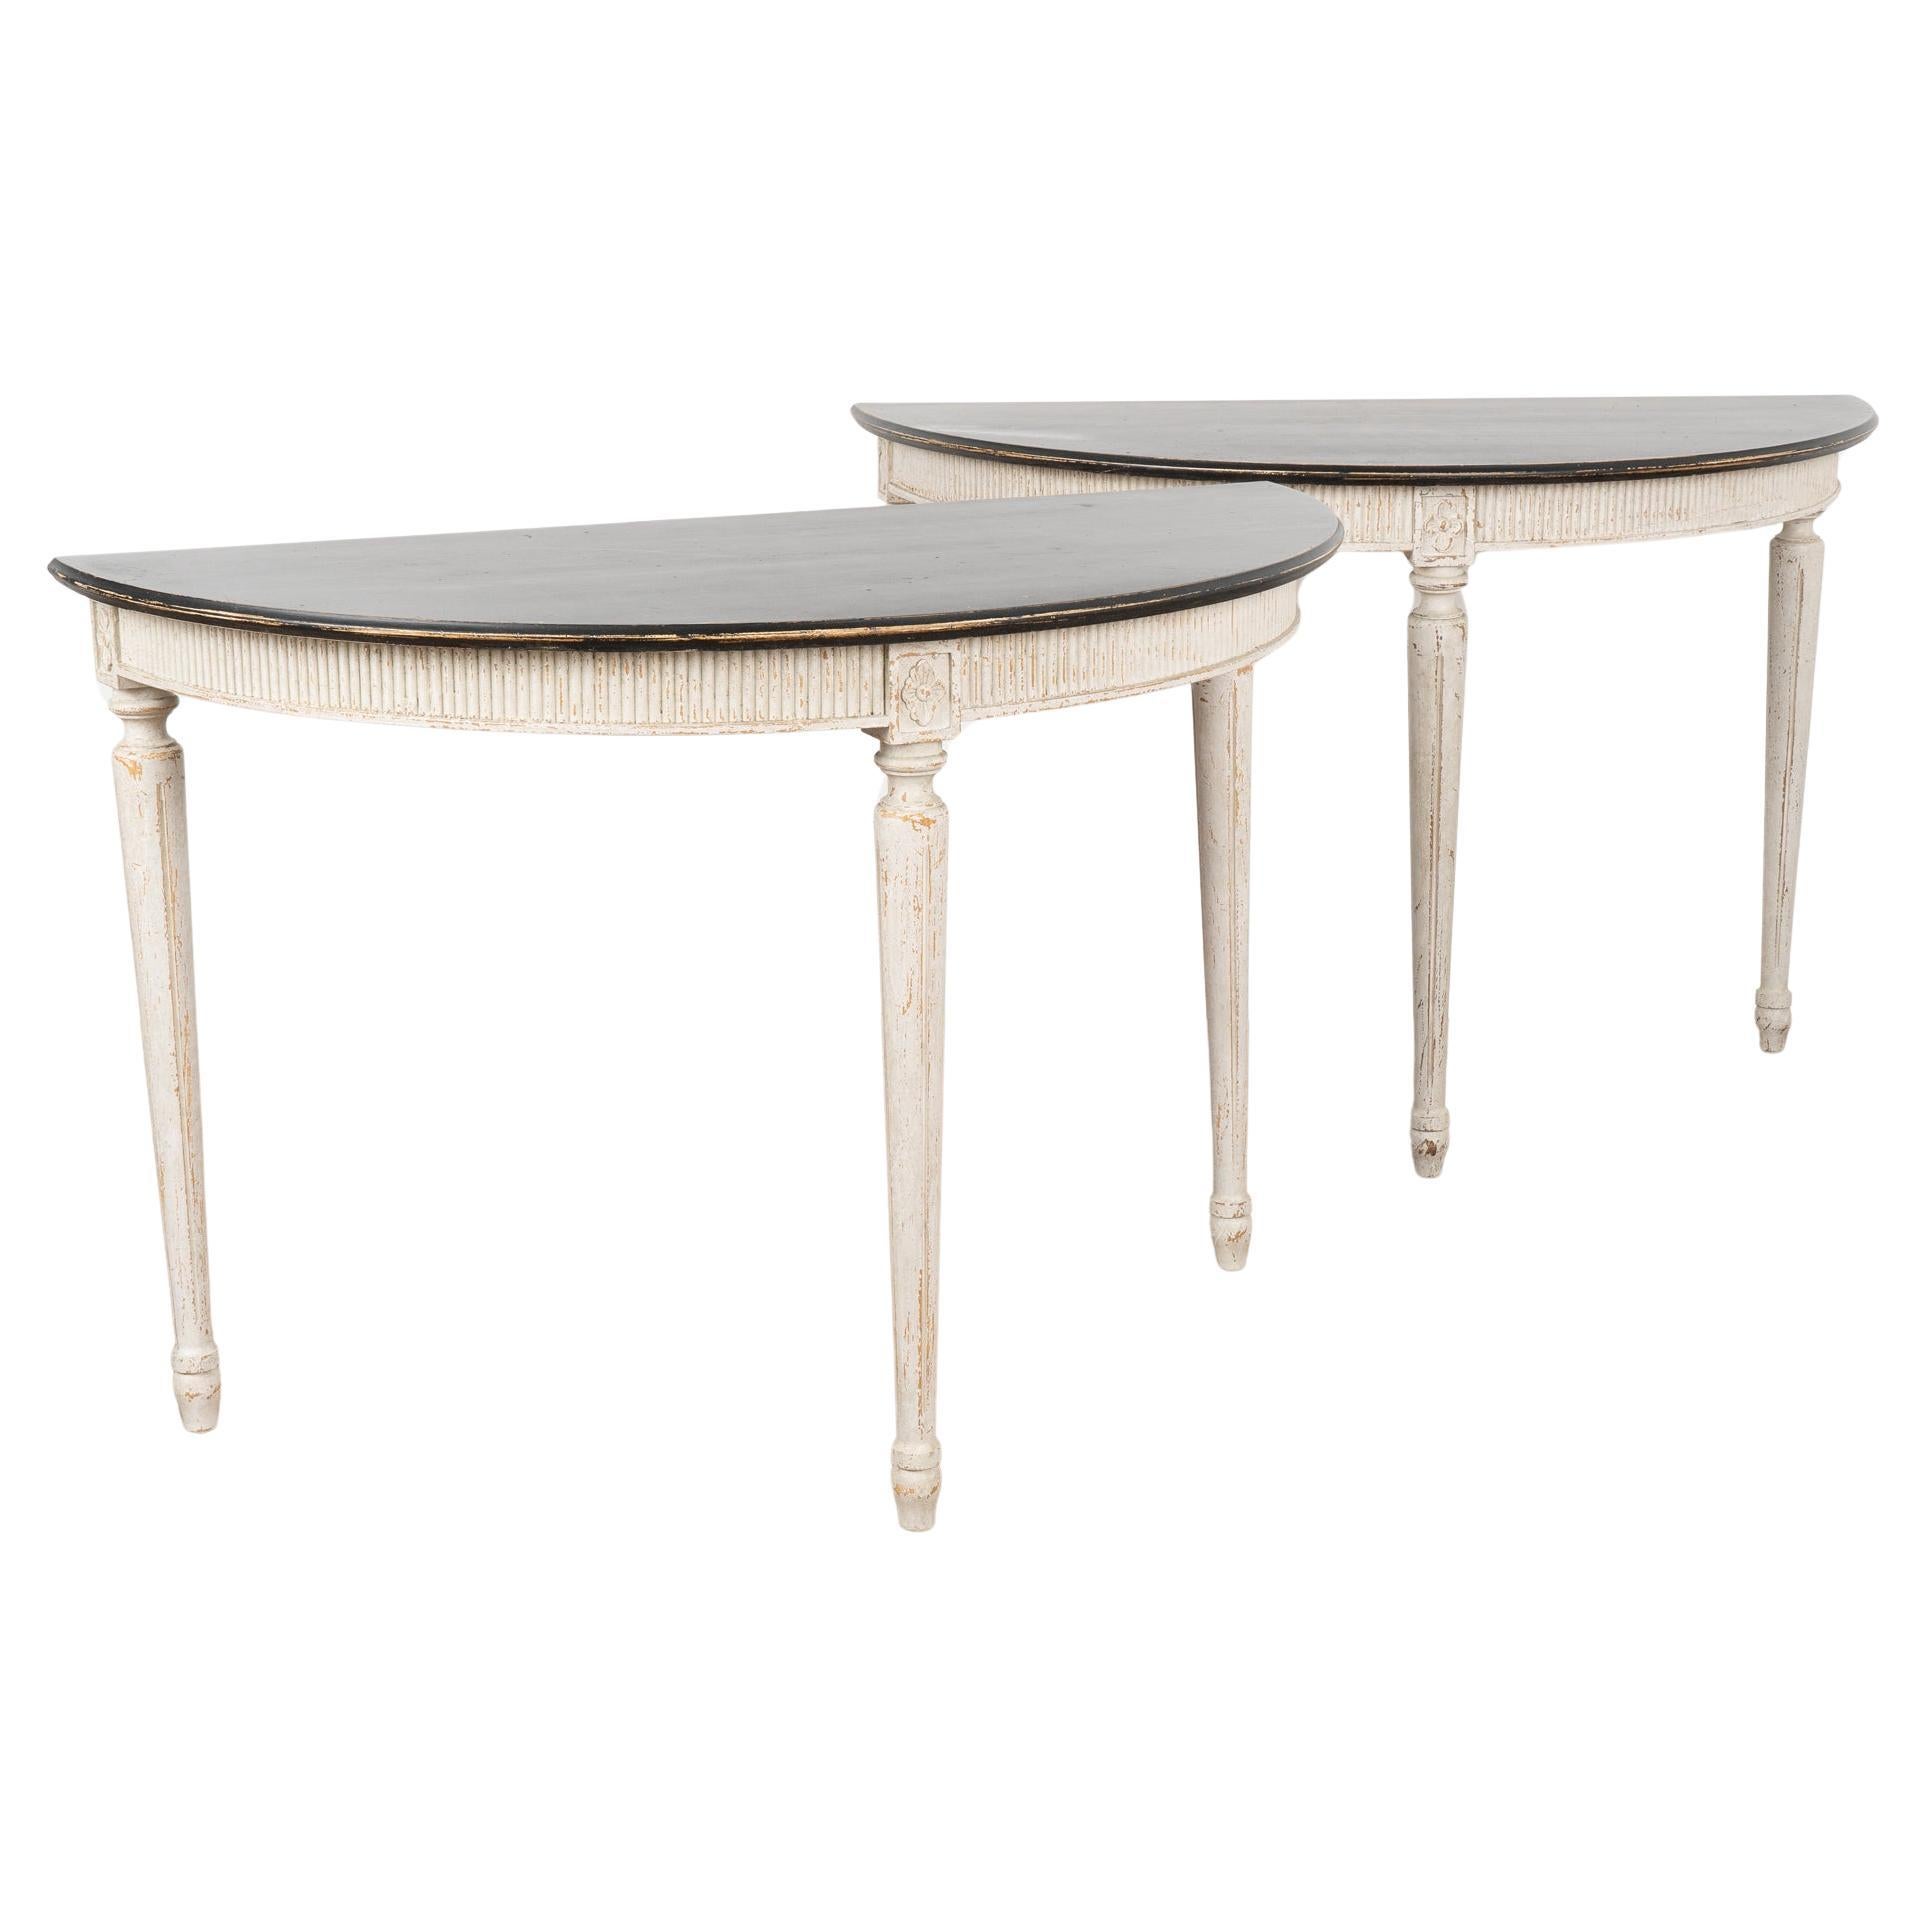 Pair Swedish Gustavian Demilune White & Black Side Tables Consoles circa 1870-90 For Sale